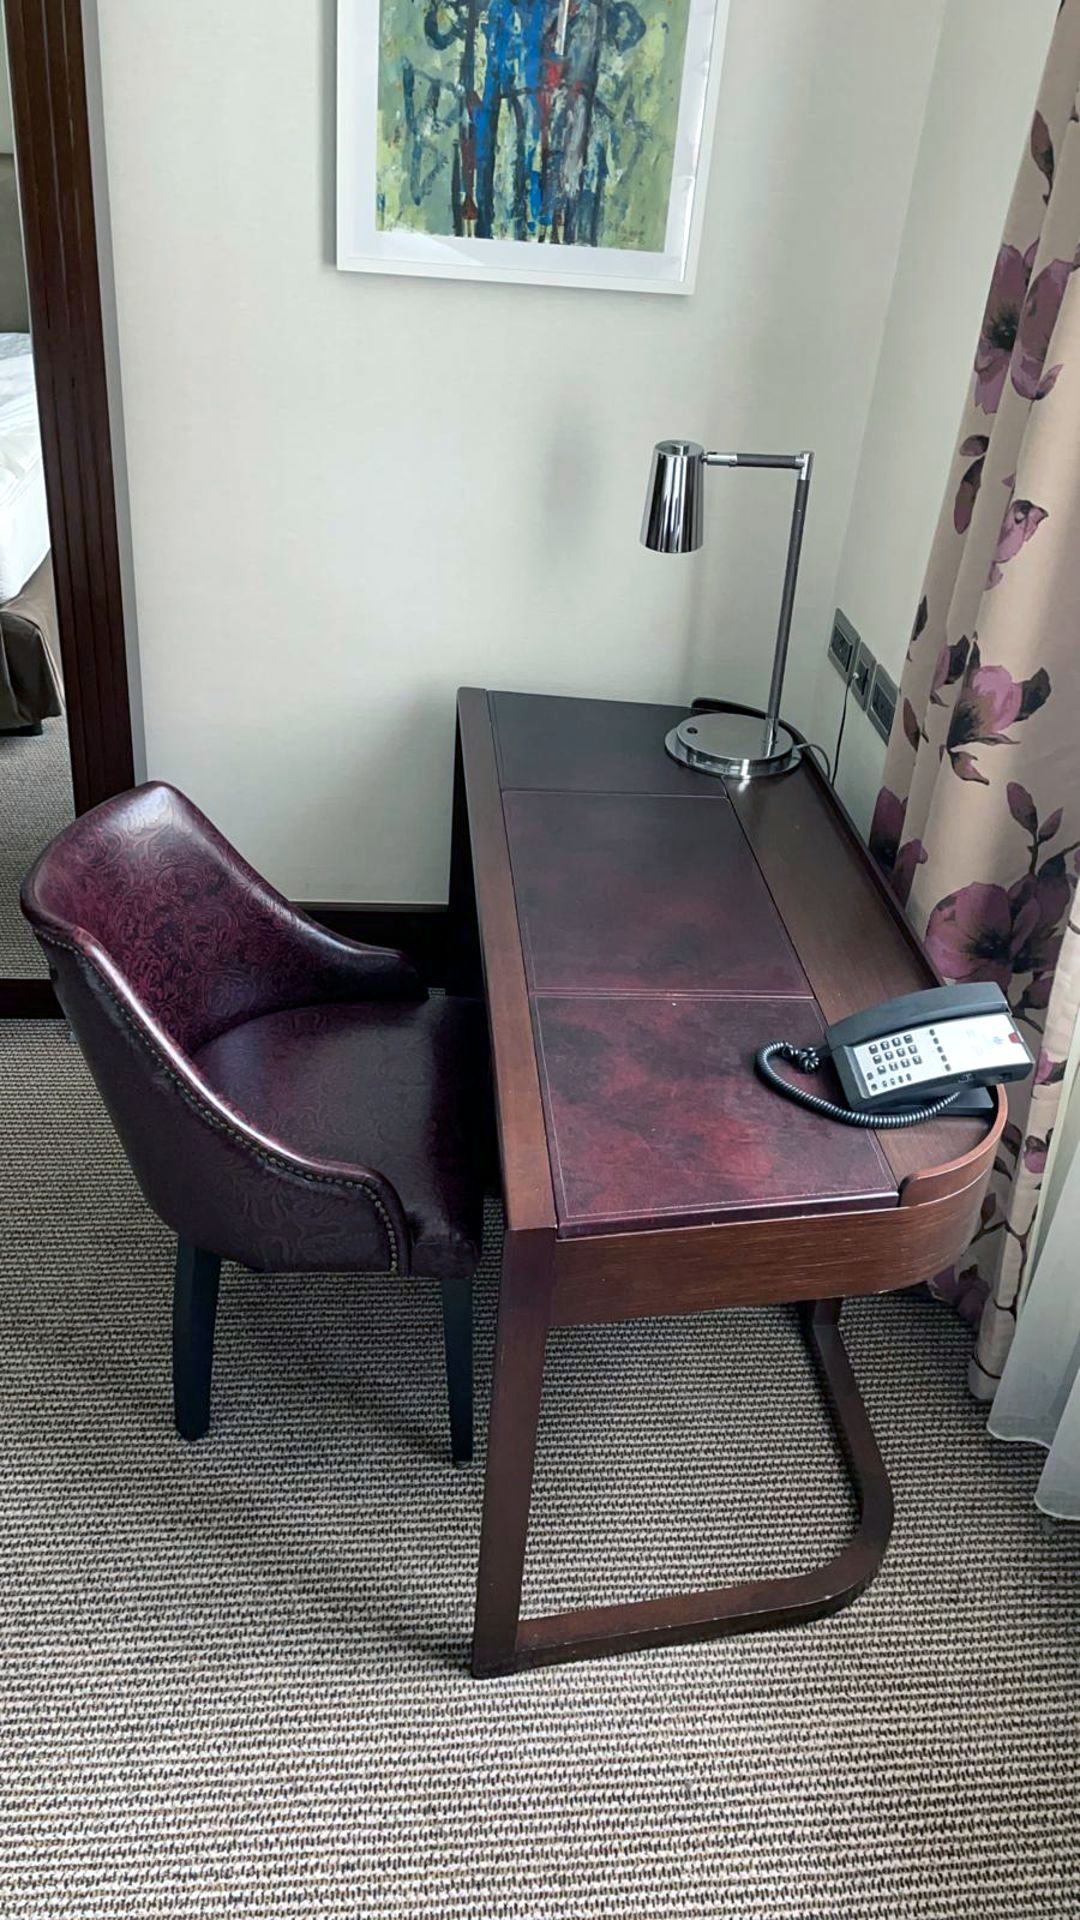 Walnut Veneer Desk By David Salmon Operational Drawers And cupboard for a room Dometic Minibar Hipro